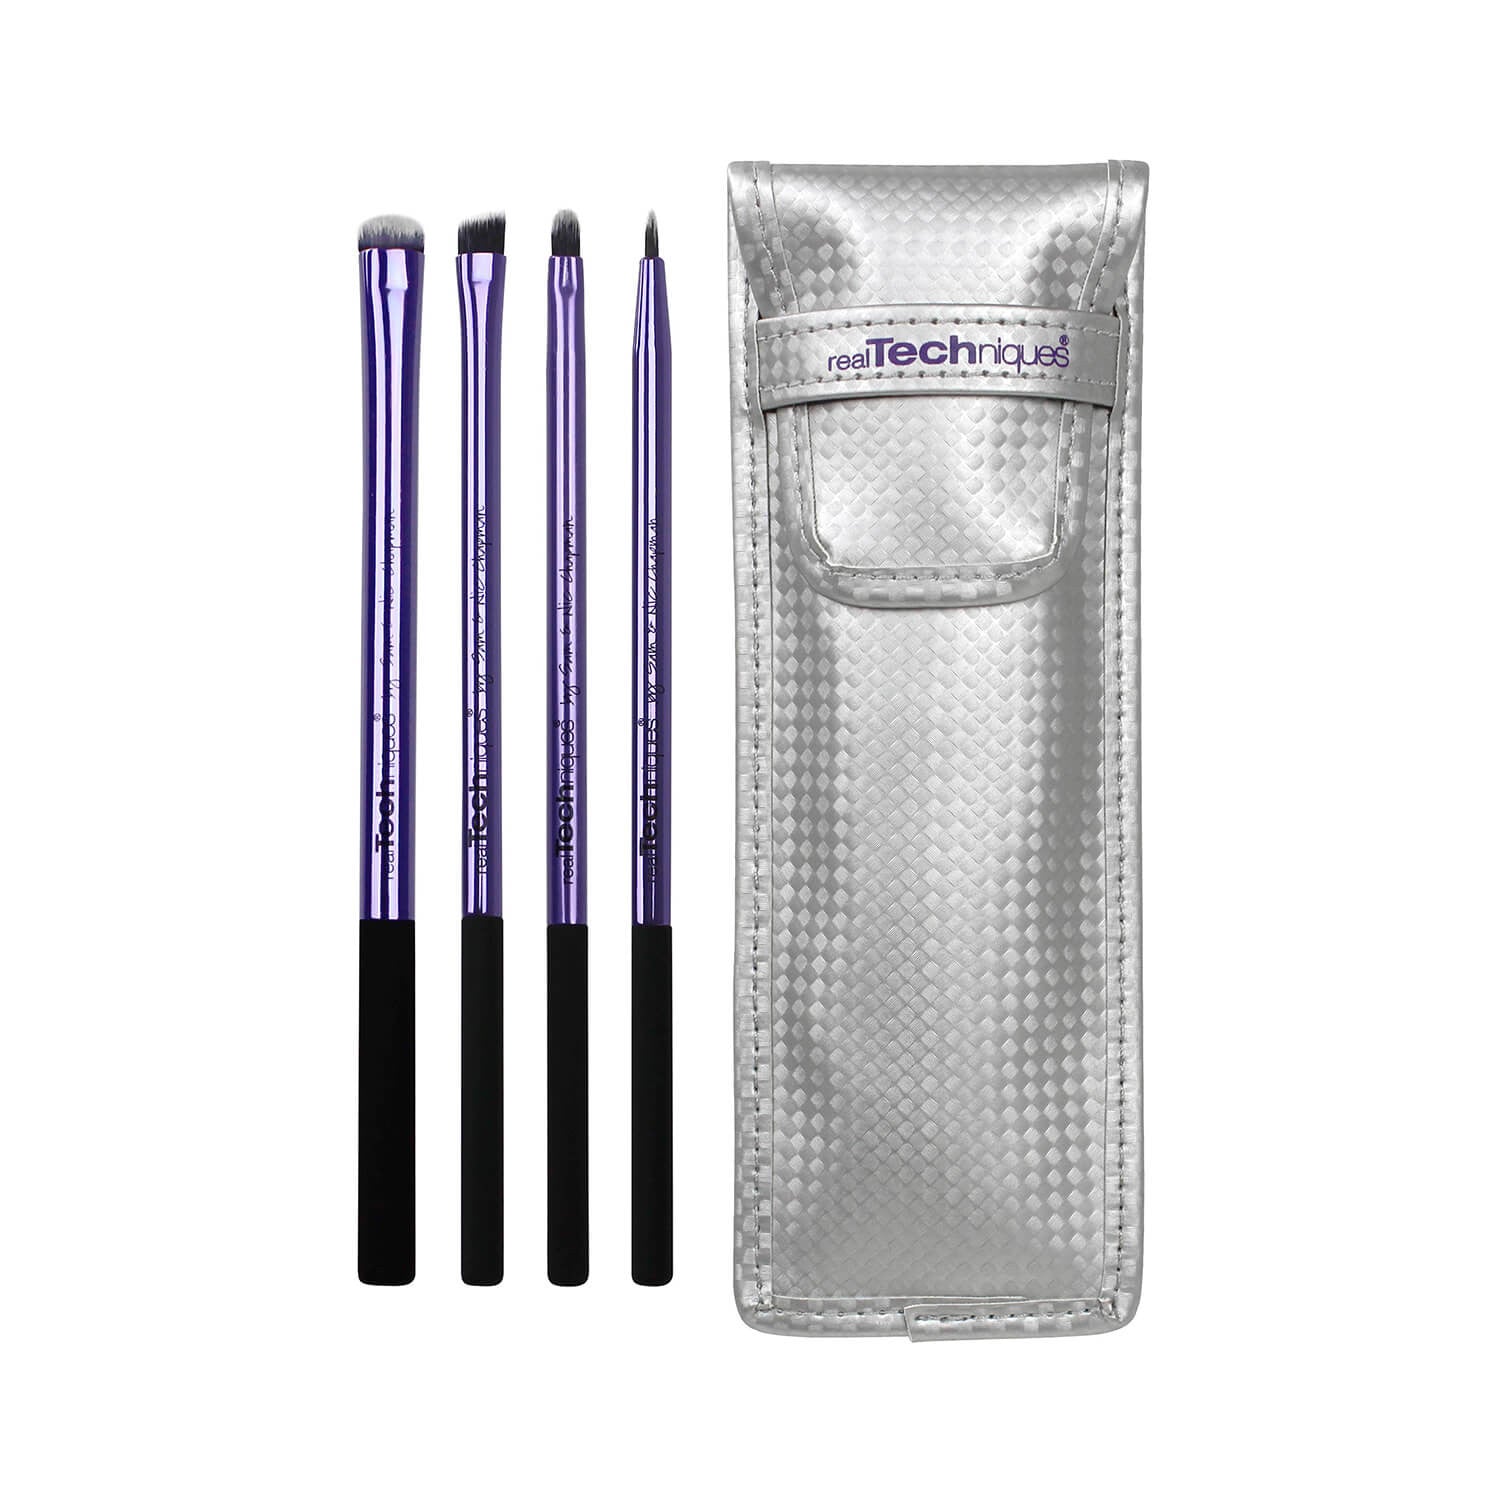 Real Techniques eyeliner set with pouch out of package